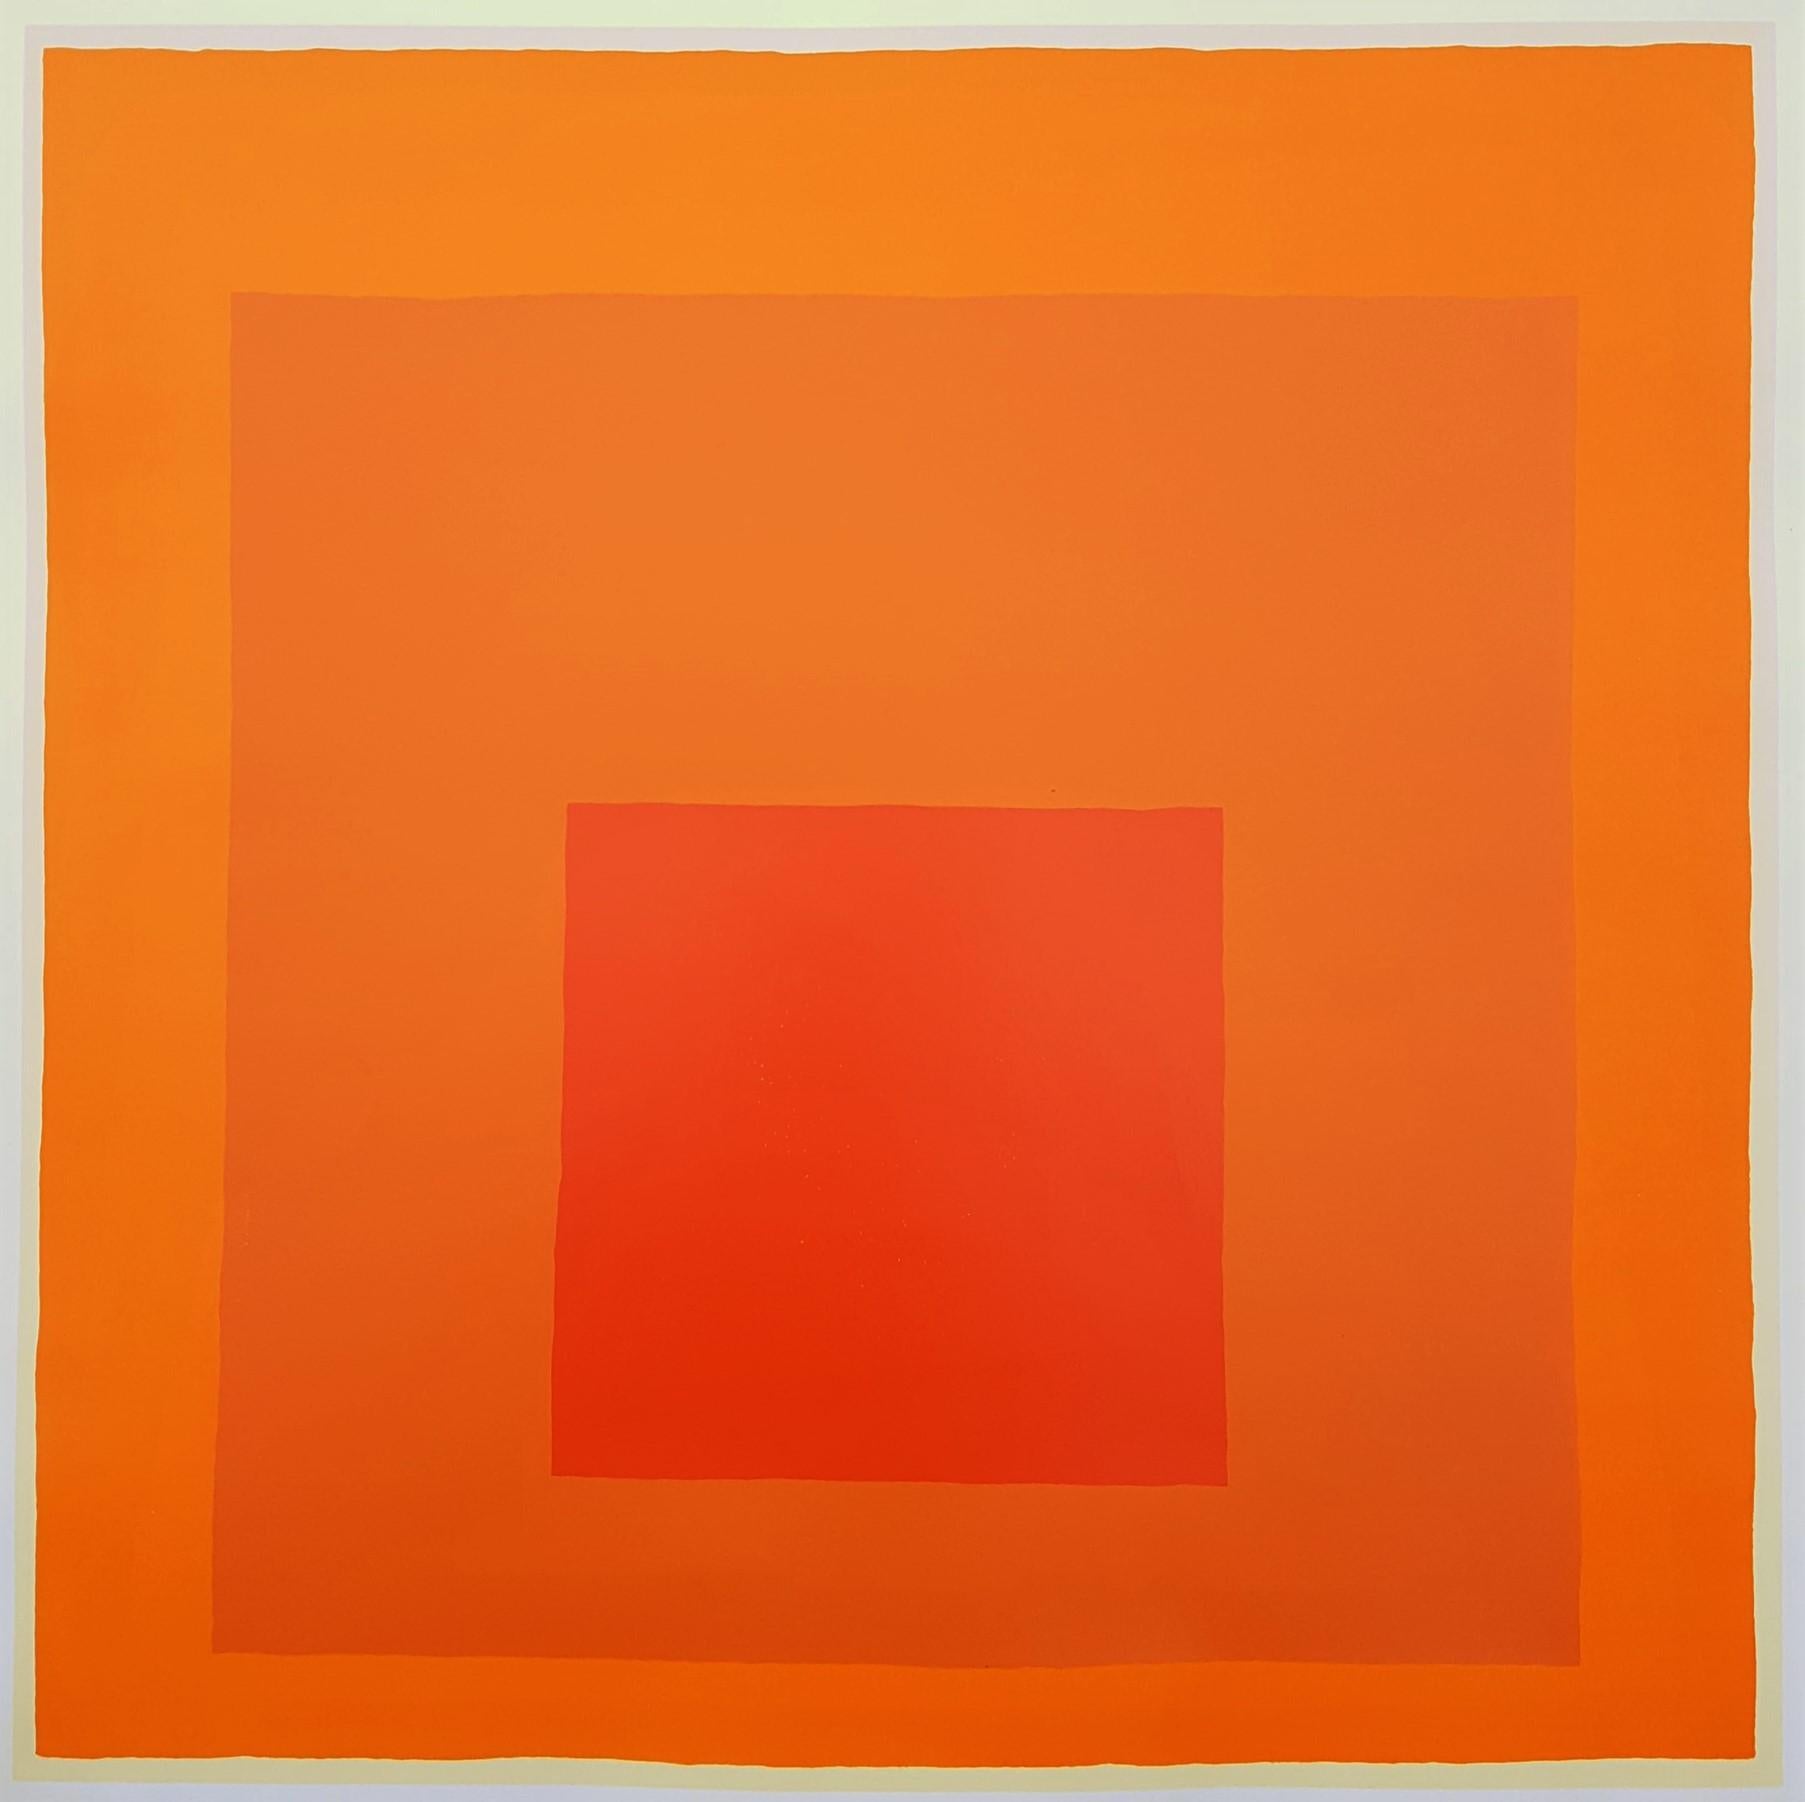 Galerie Melki (Homage to the Square) - Print by Josef Albers